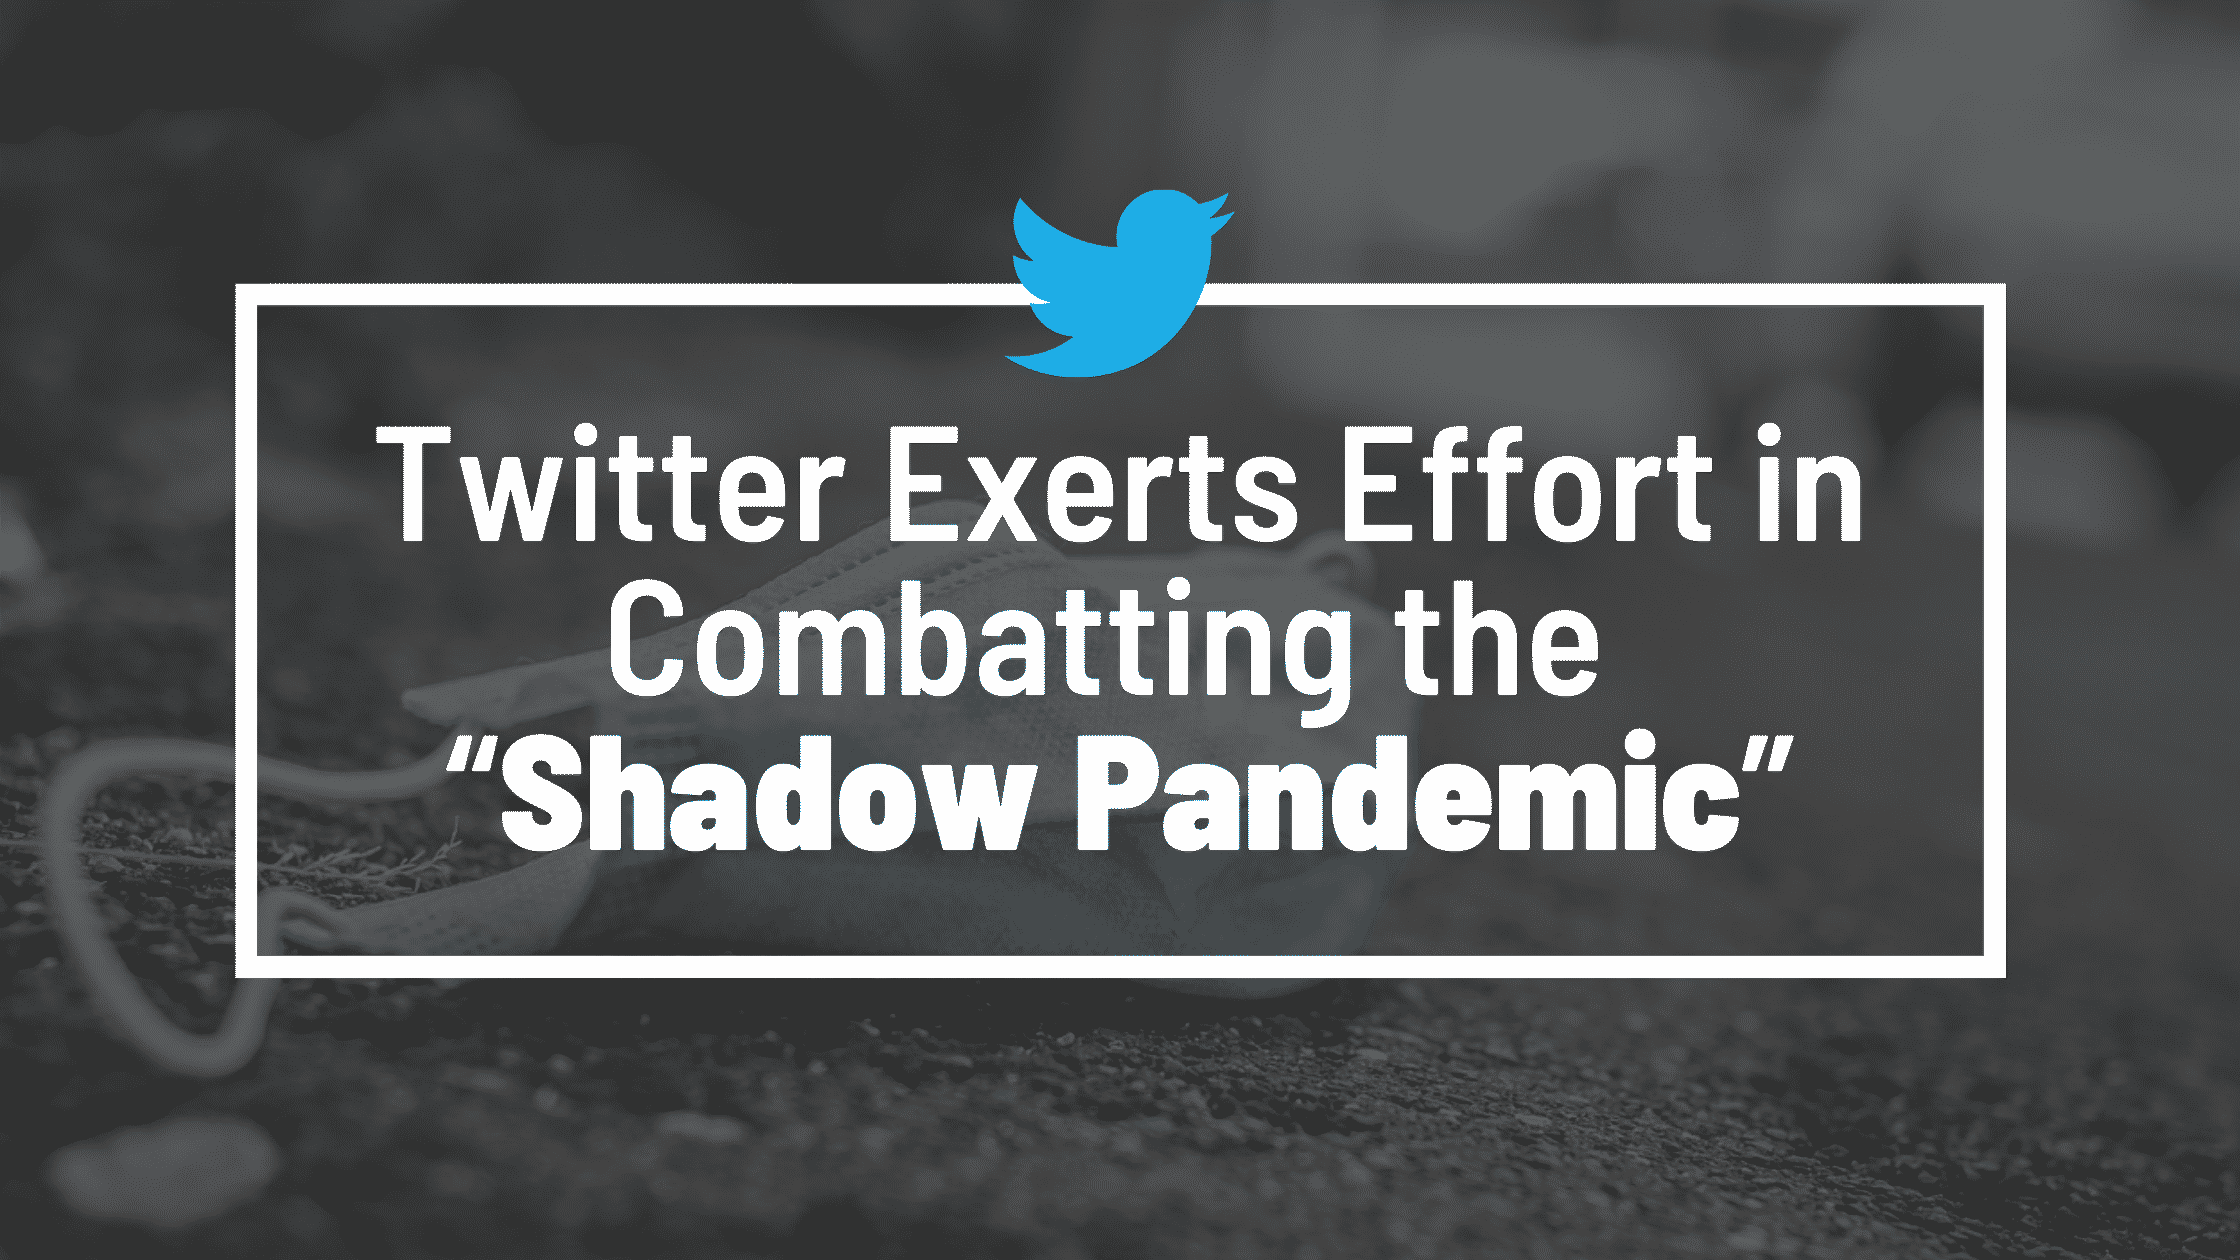 Twitter Exerts Effort in Combatting the “Shadow Pandemic”